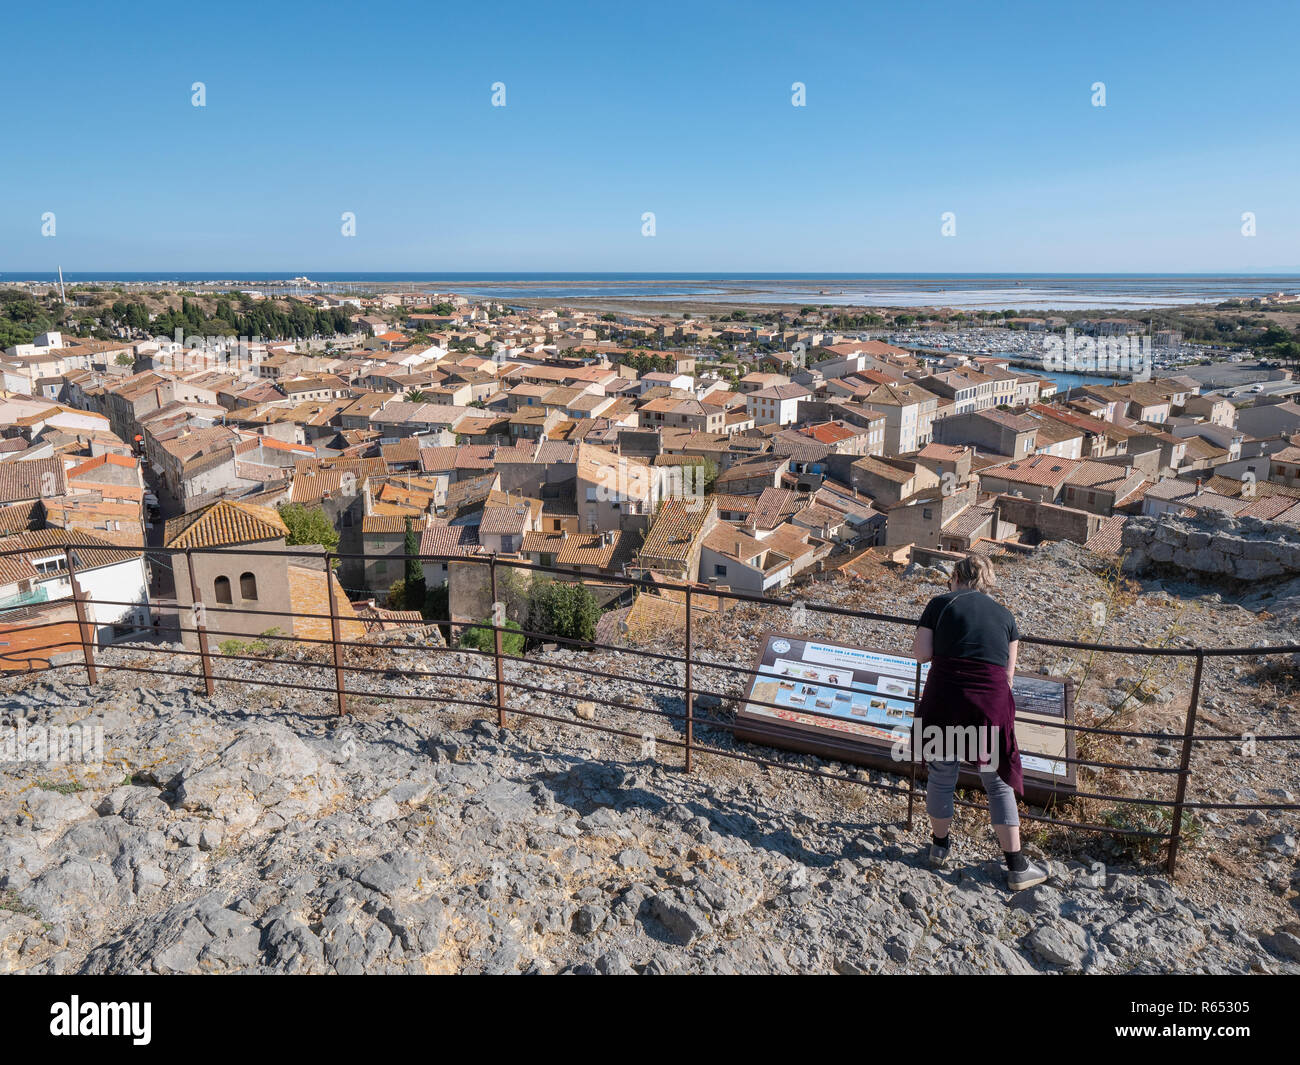 Rooftop view of Gruisson, southern France, from high viewpoint looking across the town to Gruisson Plage and the Mediterranean Stock Photo